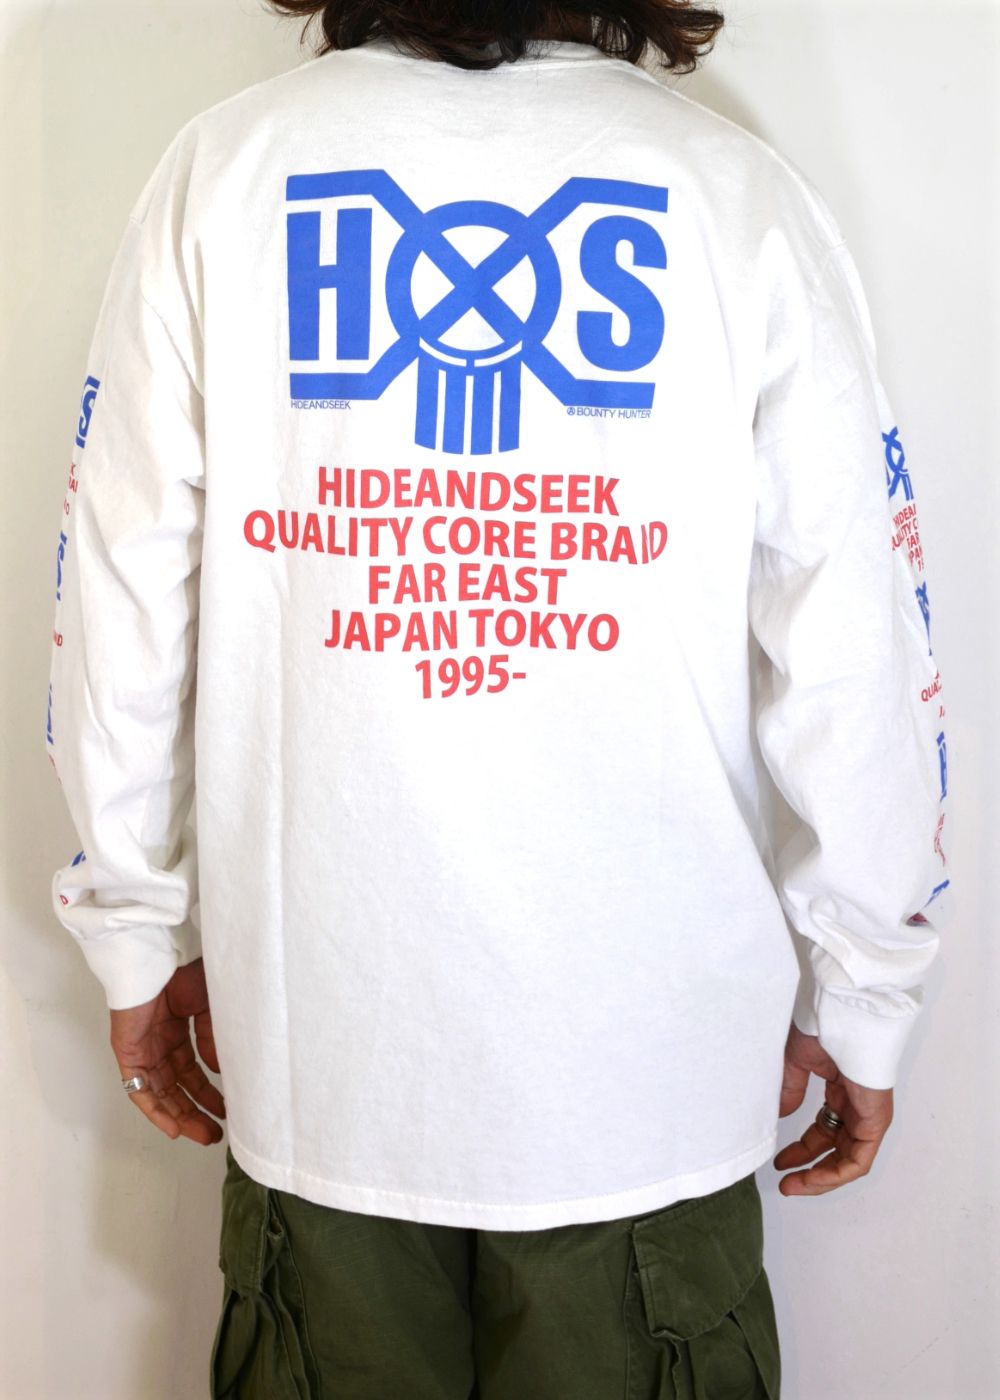 HIDE AND SEEK - HS×BH L/S TEE (WHITE) / バウンティーハンター